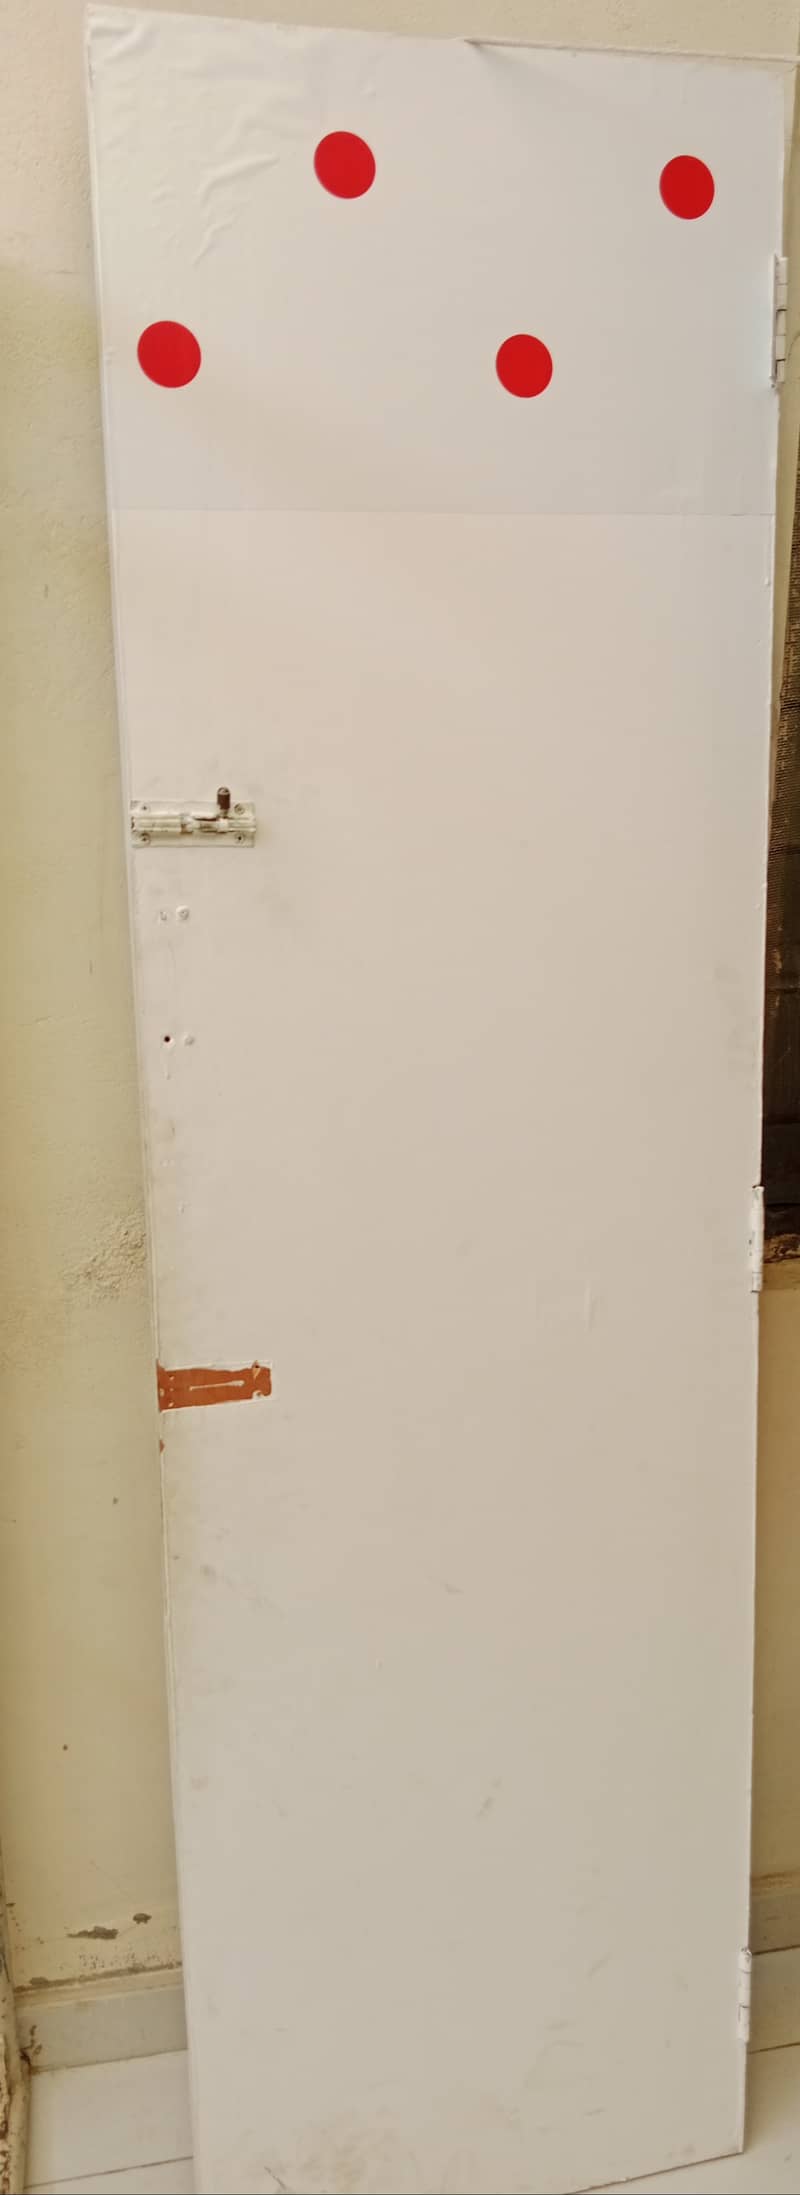 Door for sale neat and clean only WhatsUp 03060103003 5